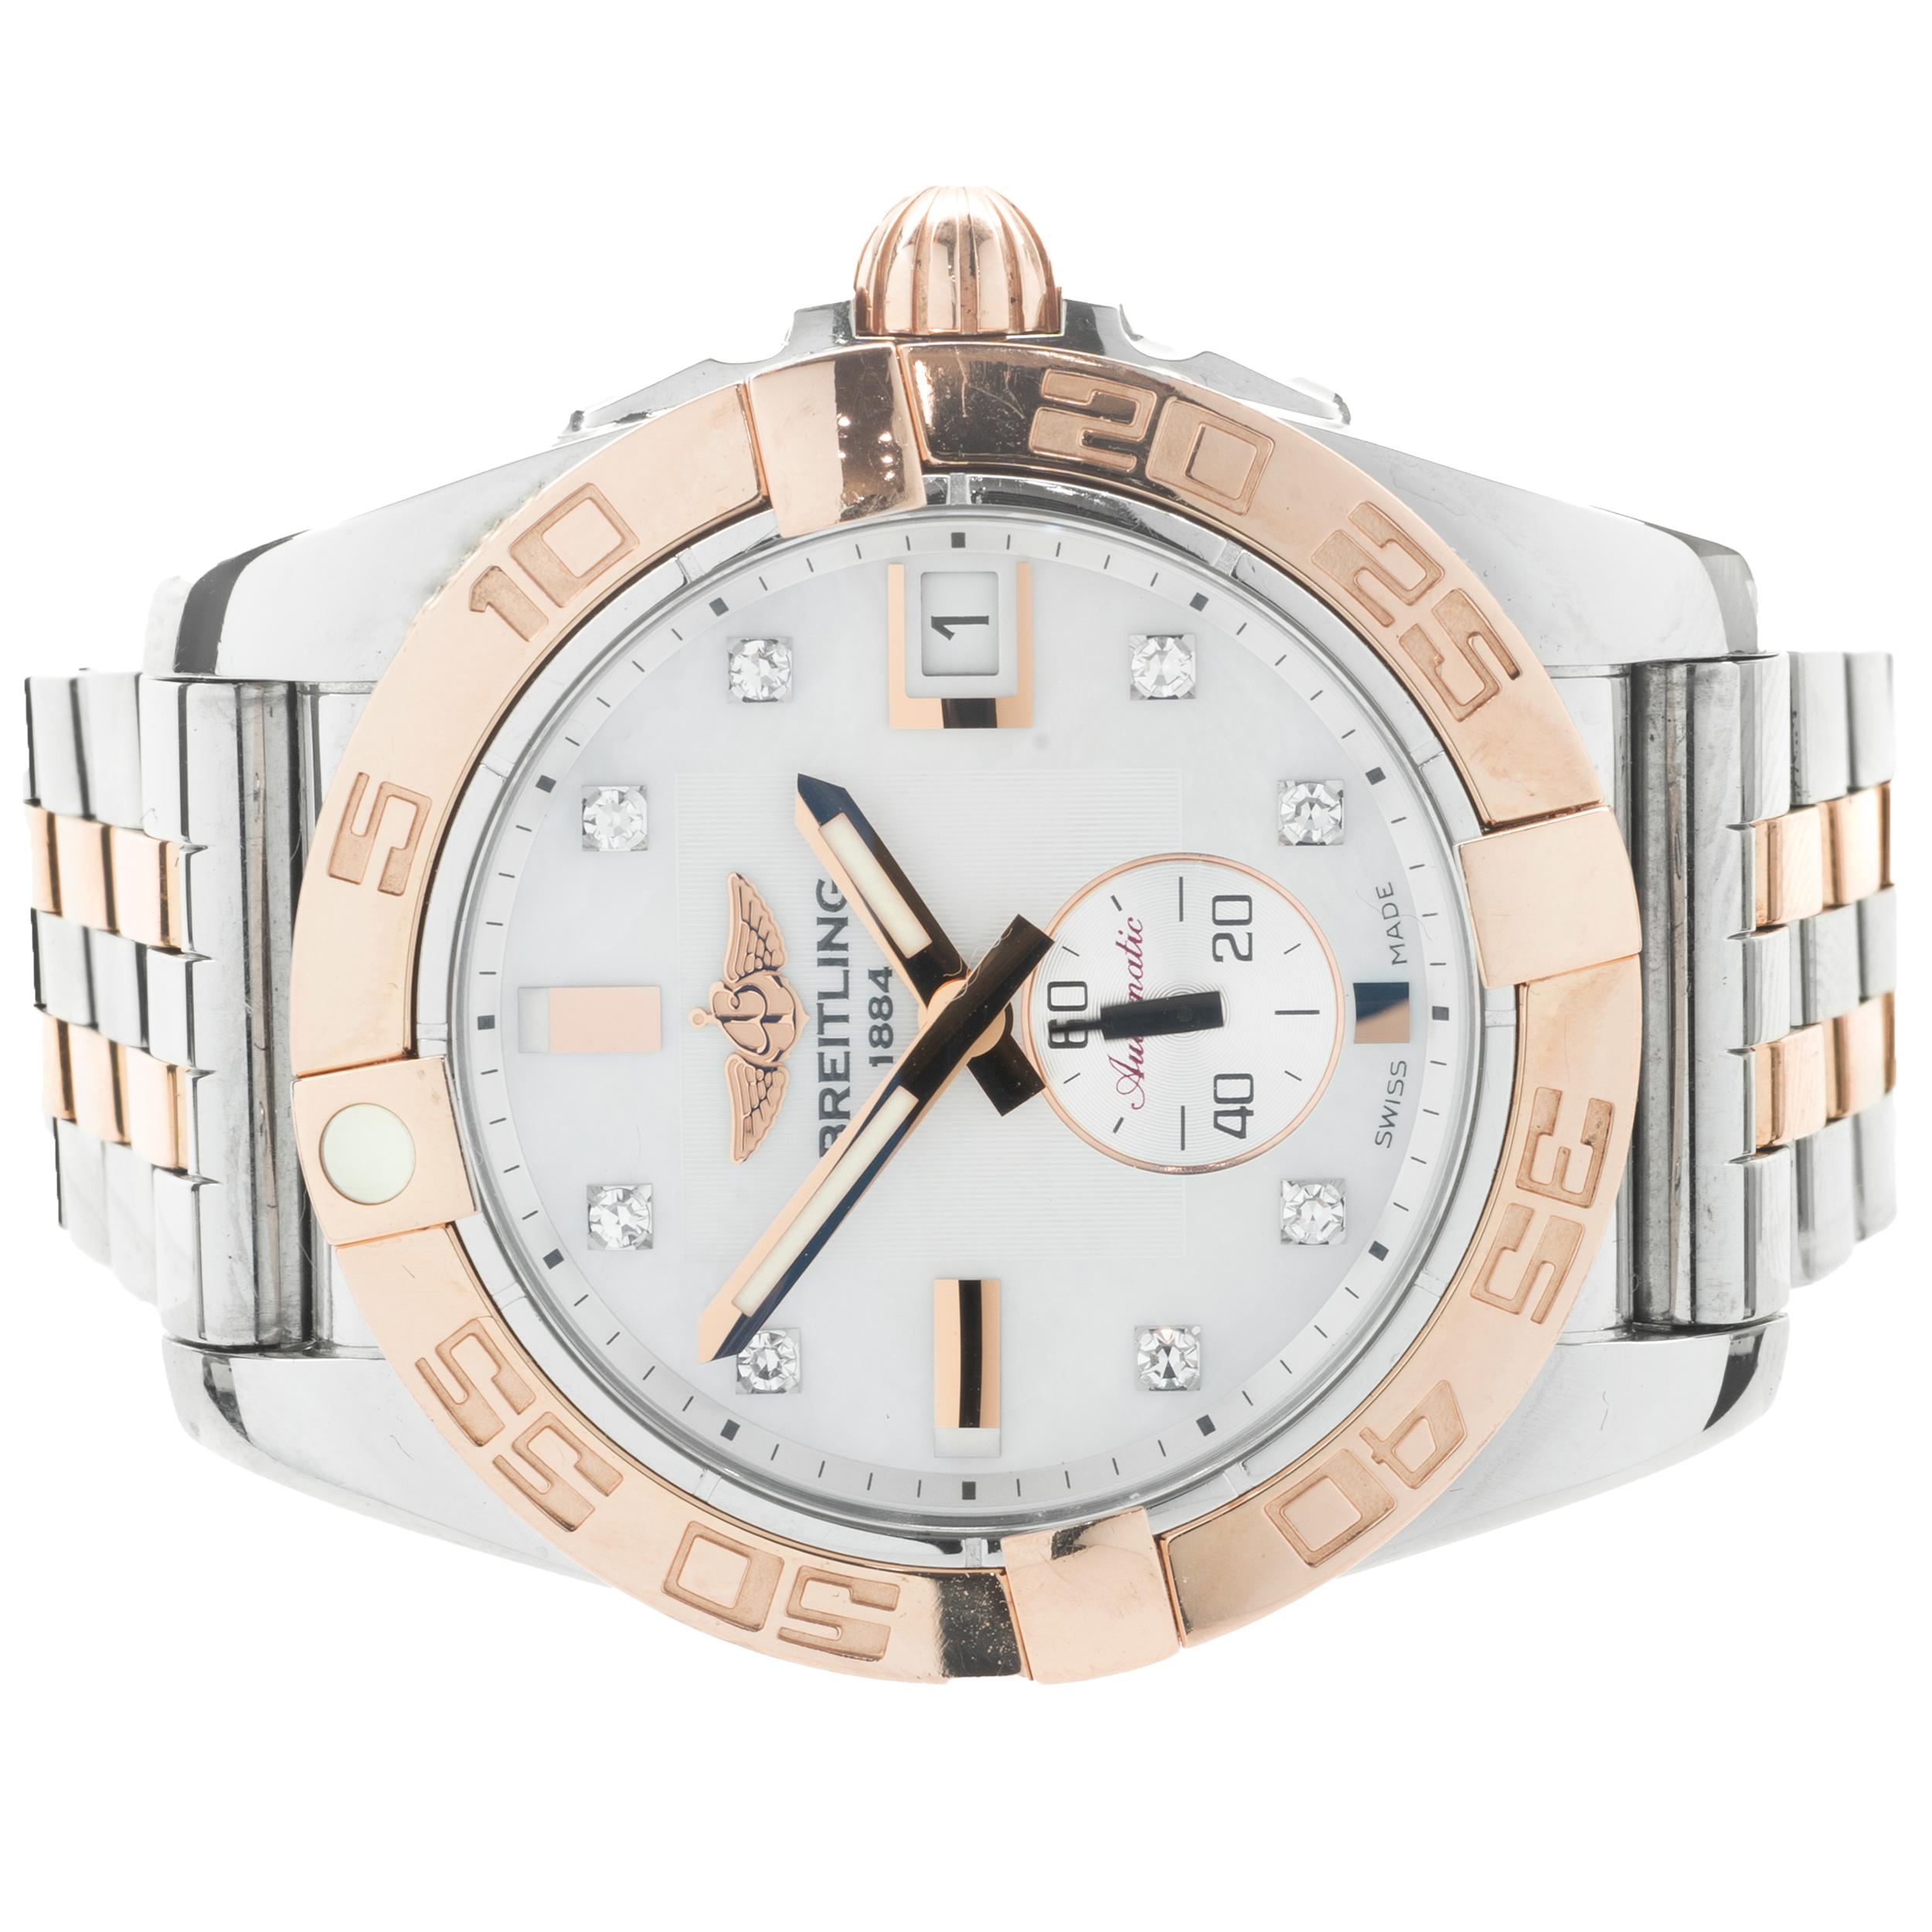 Movement: automatic
Function: uni-rotational bezel, date, seconds
Case: round 36mm stainless steel case, 18K rose gold rotating bezel, sapphire protective crystal, Breitling engraved case-back, screw-down crown, water resistant to 100 meters
Band: